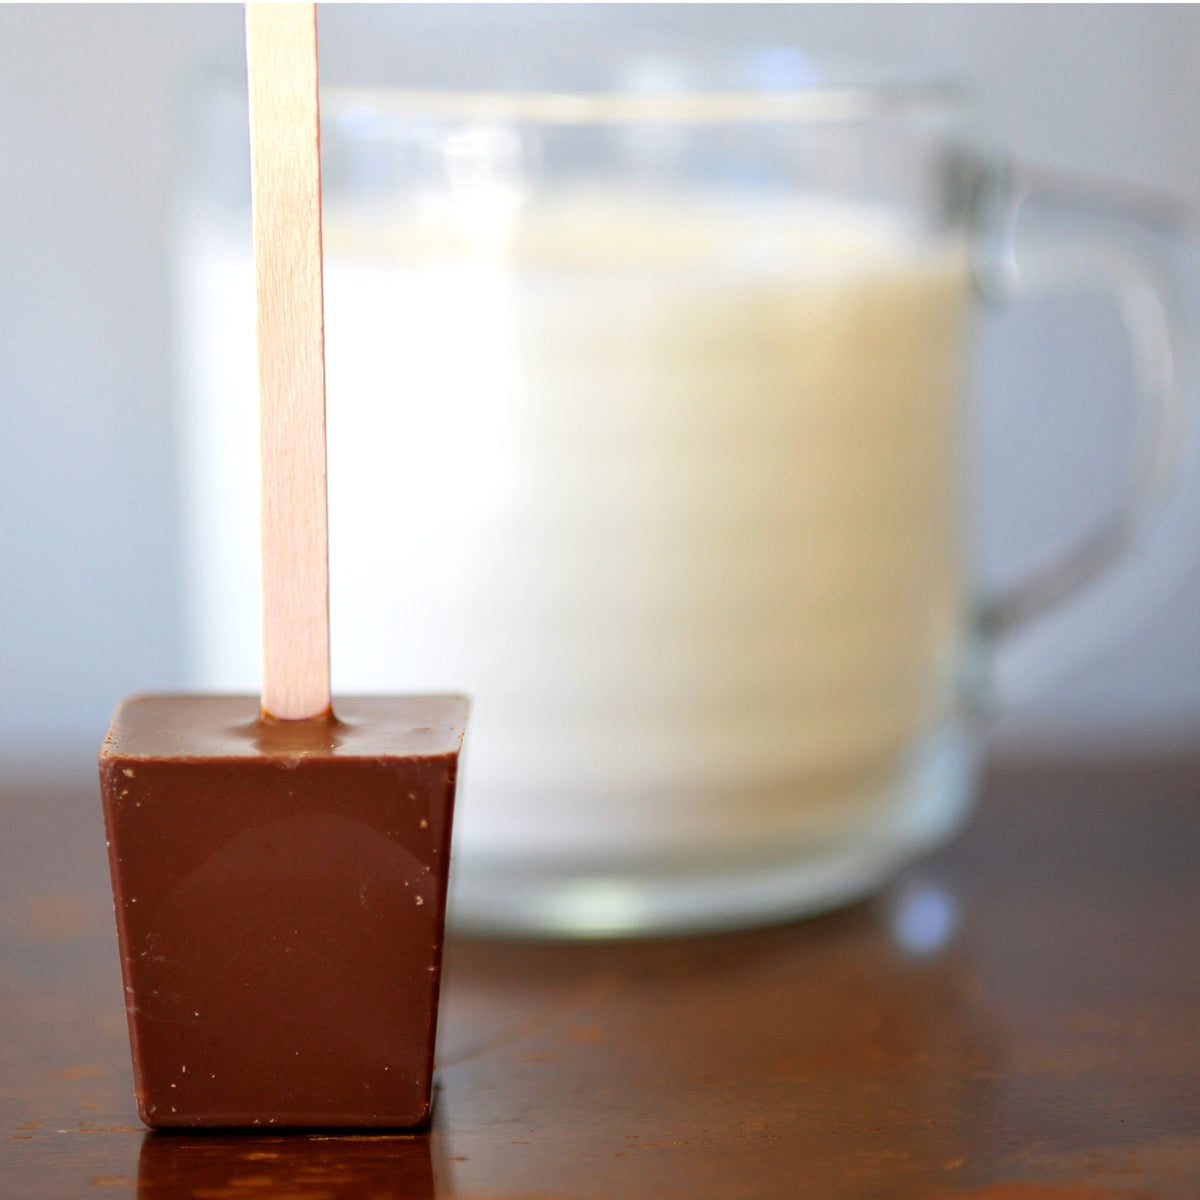 A cube of milk chocolate on a stick sitting in front of a mug of milk